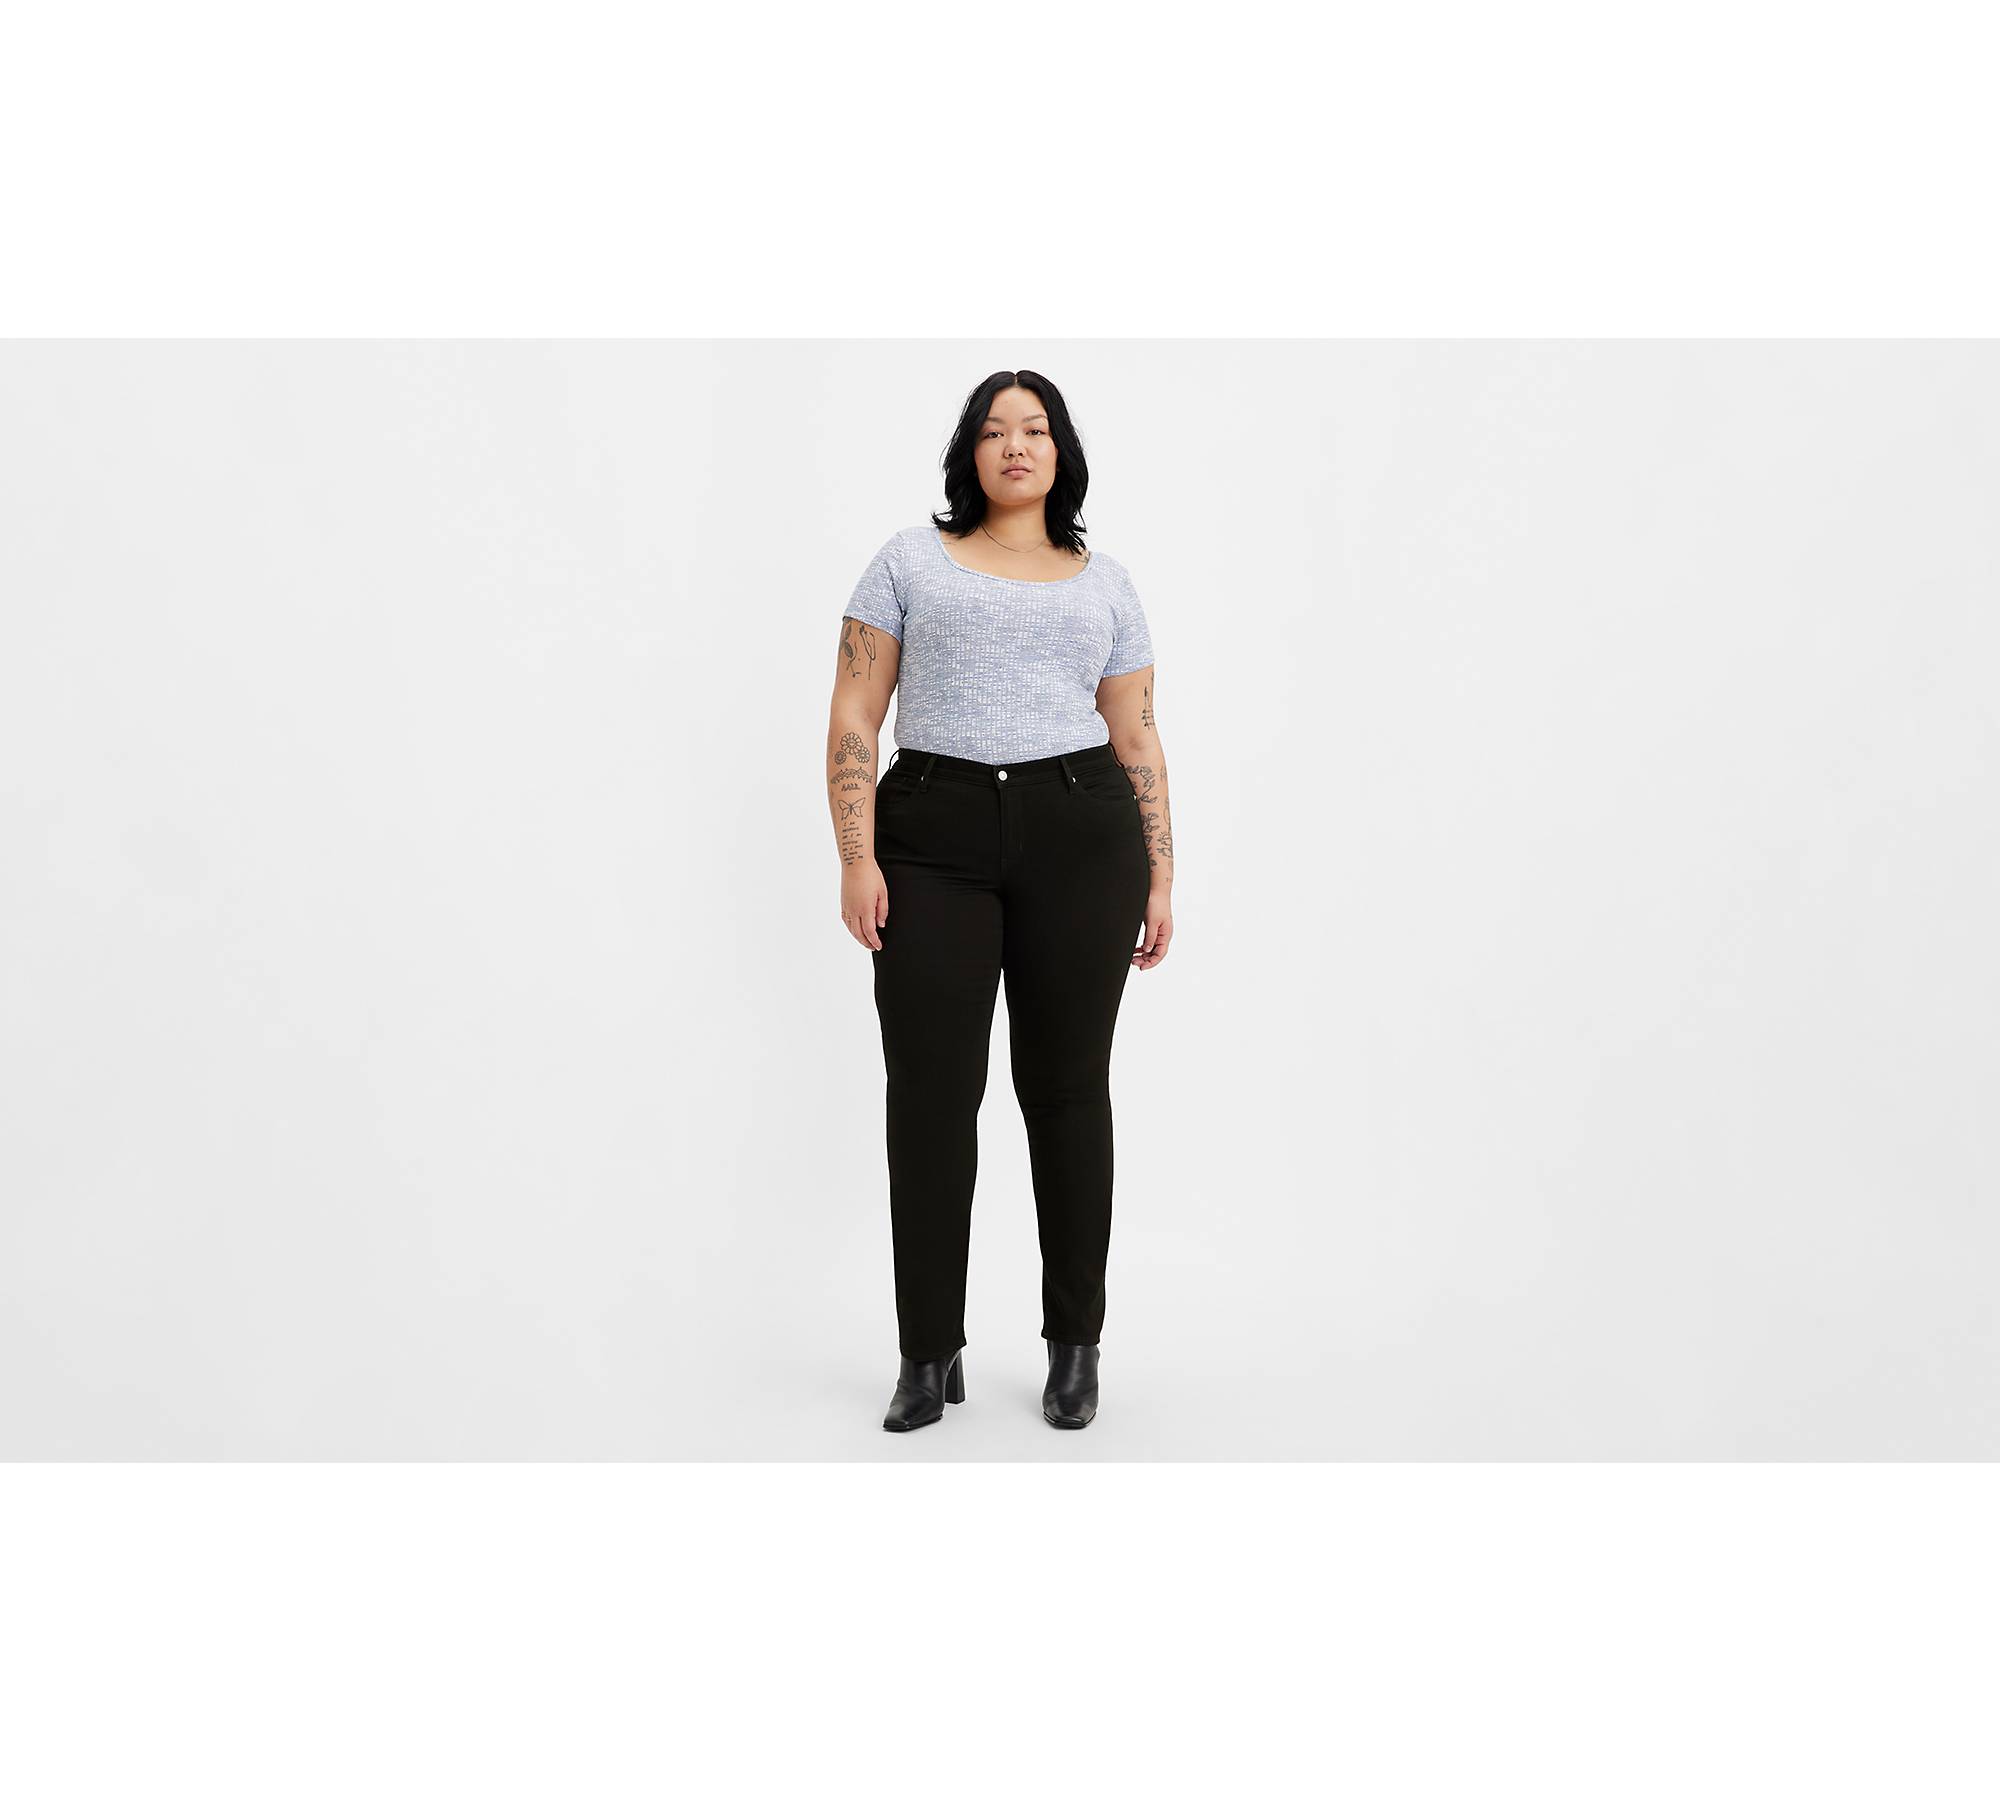 Plus size fall outfits  Black top outfit, Plus size black jeans, Plus size  fall outfit